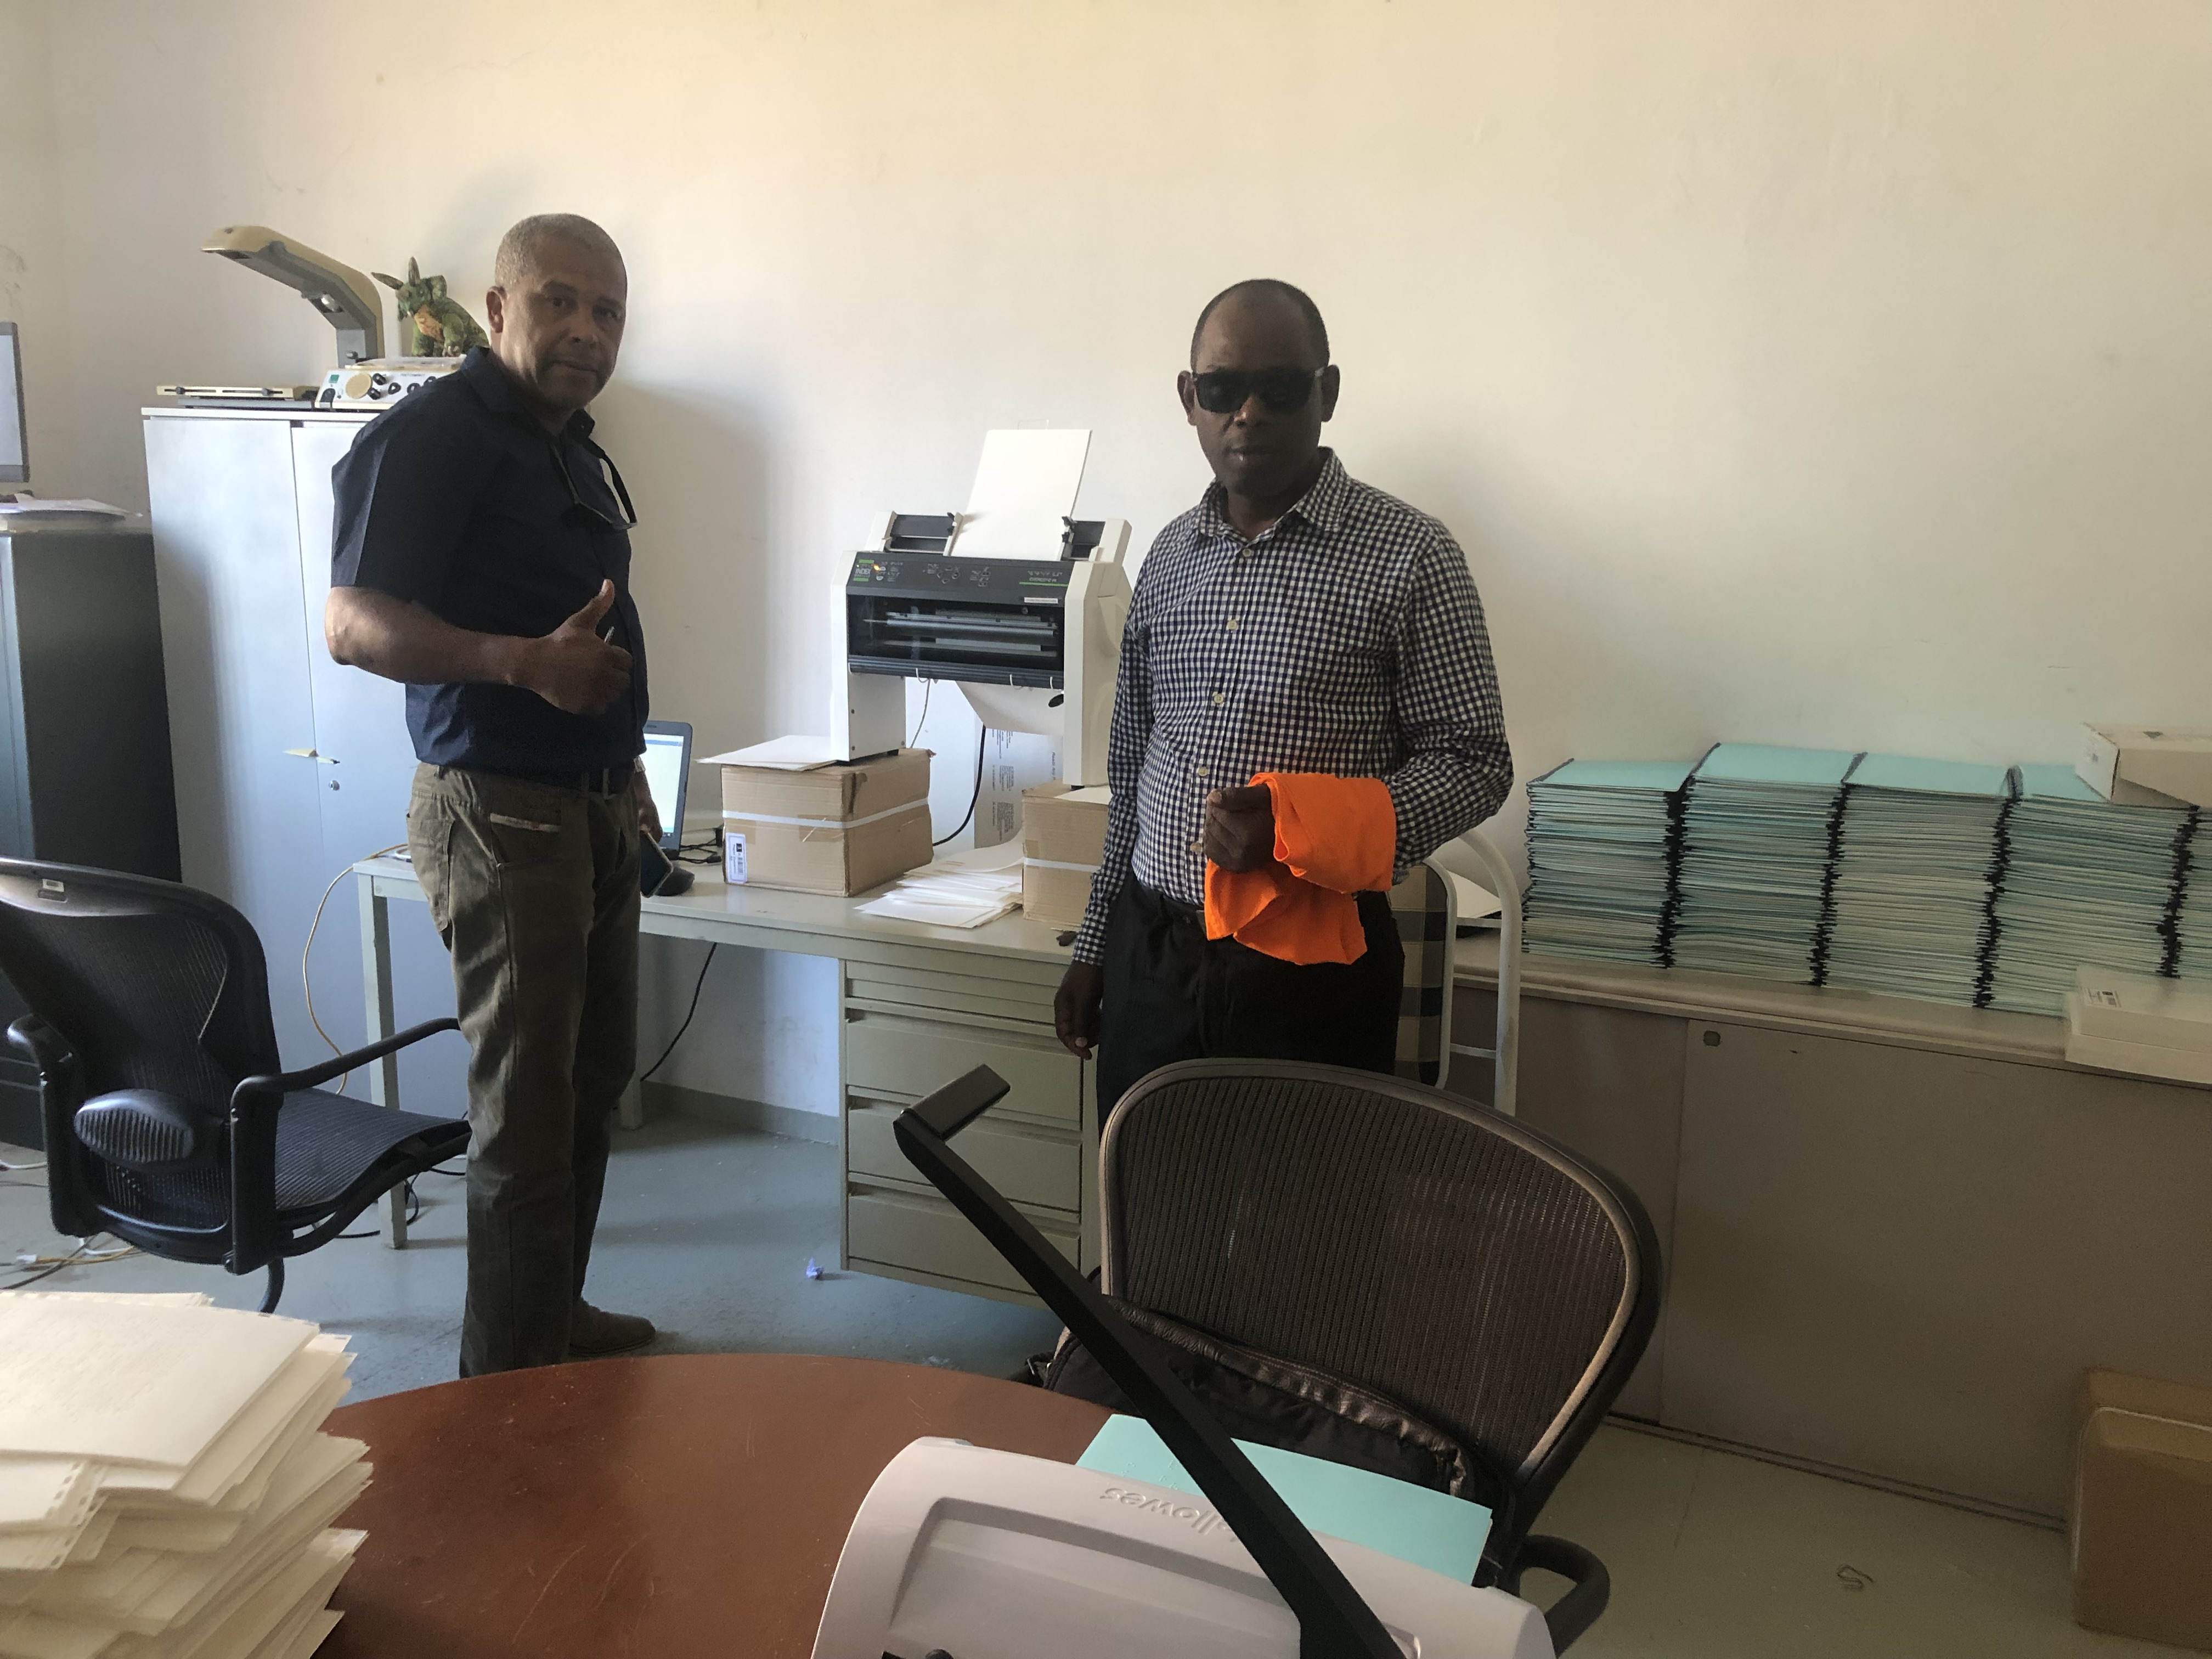 On a visit to the Association of the Visually Impaired of Cape Verde (ADEVIC), Abraão Borges, RNCEPT-CV’s national coordinator, and Dr. Marciano Monteiro, president of ADEVIC and RNCEPT-CV, stand in front of the Braille printer.